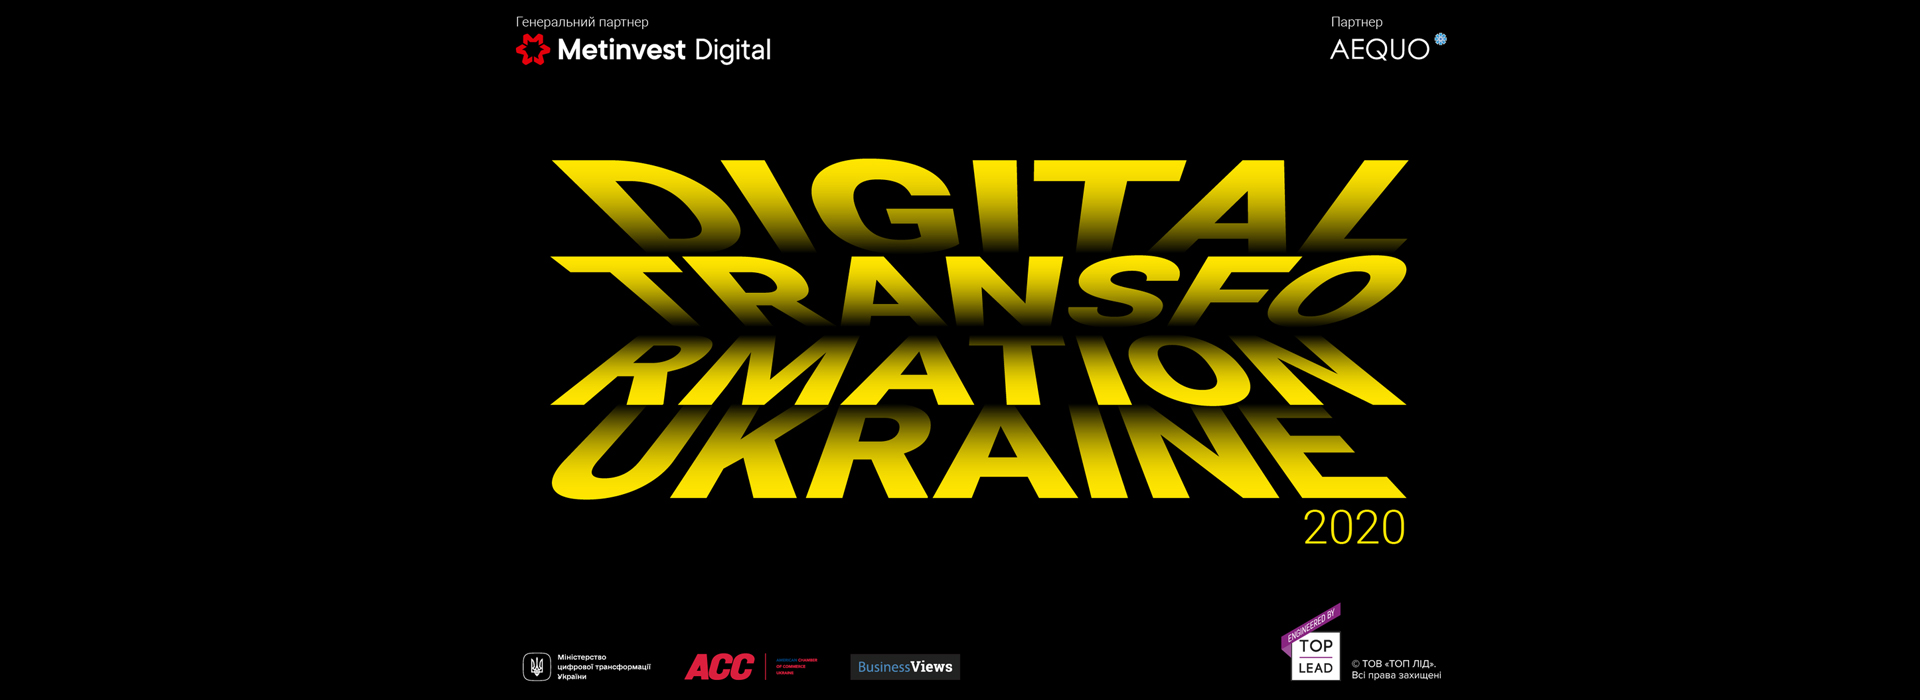 Top Lead has published an infographic study on the digital transformation of Ukrainian business